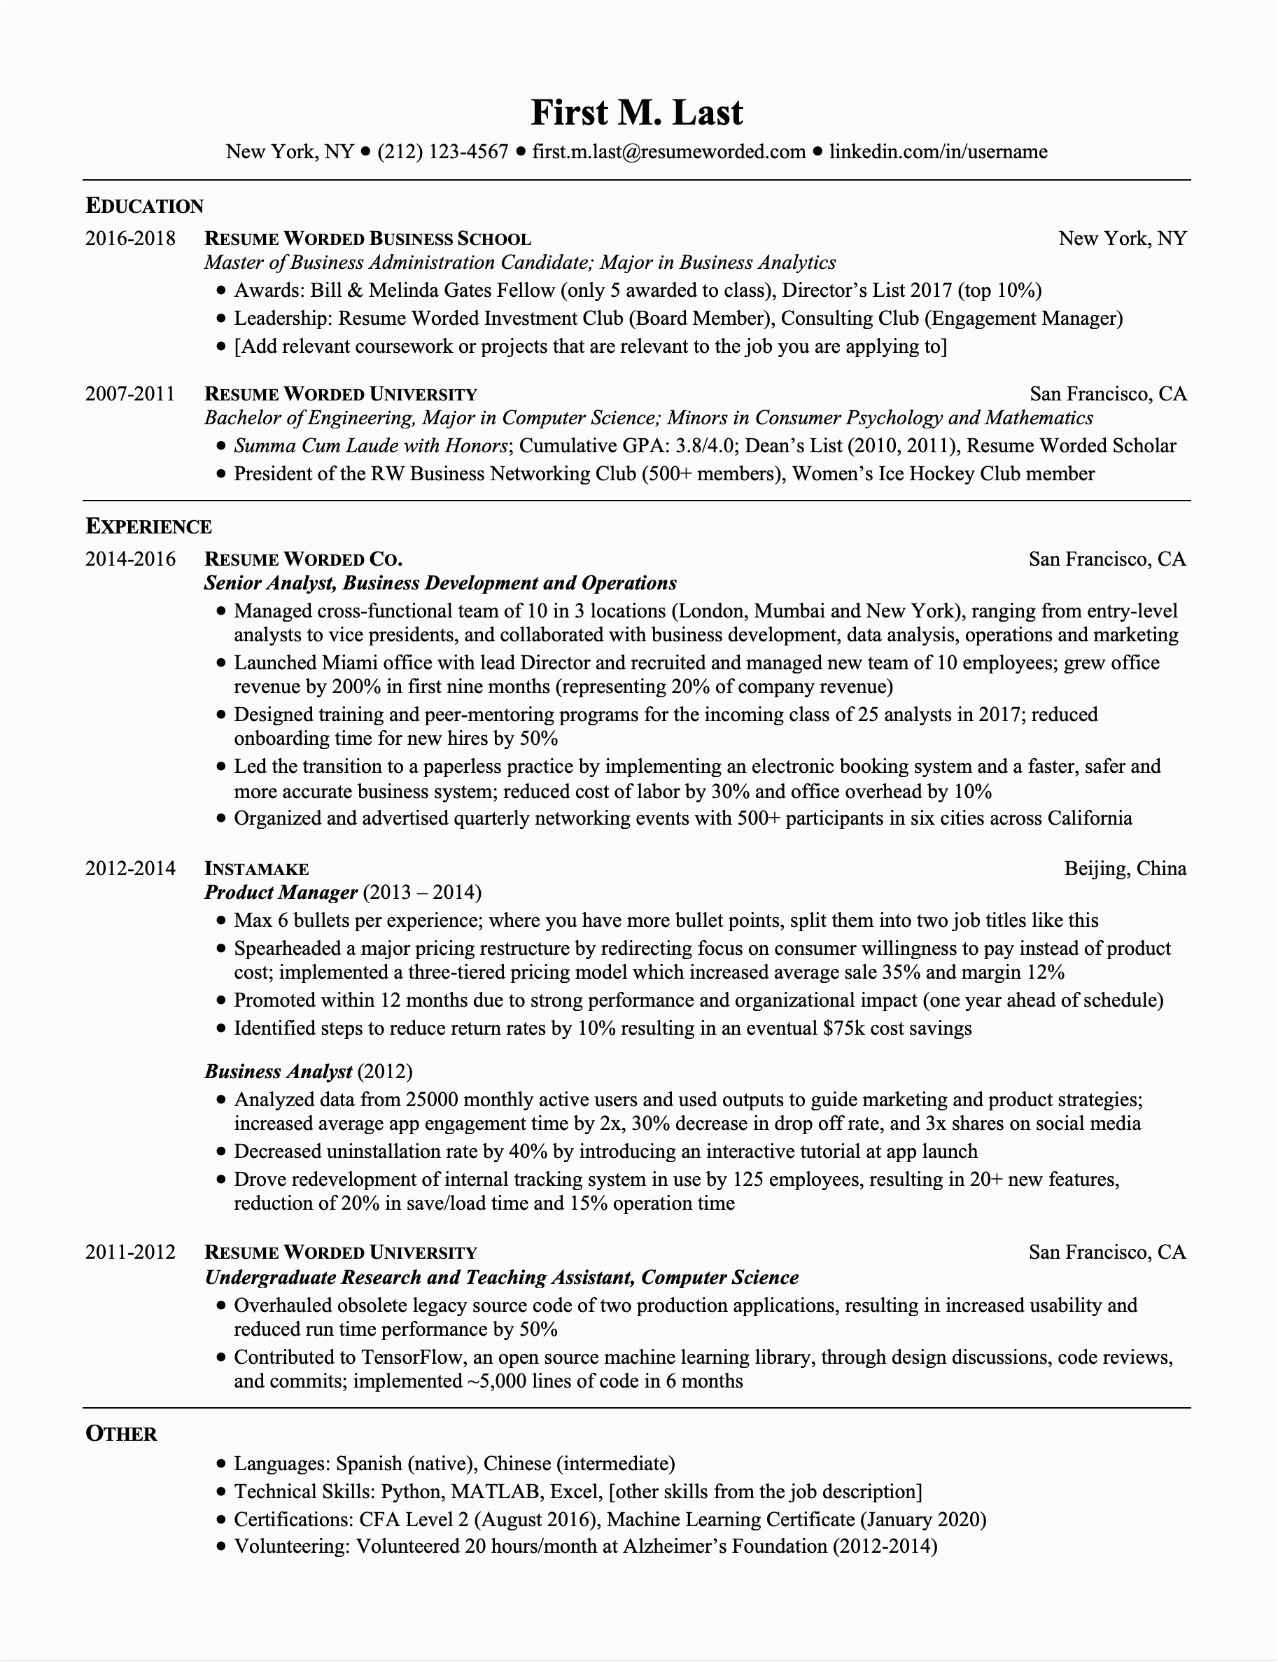 Sample Resume Different Positions Same Company Resume format Multiple Positions In Same Pany